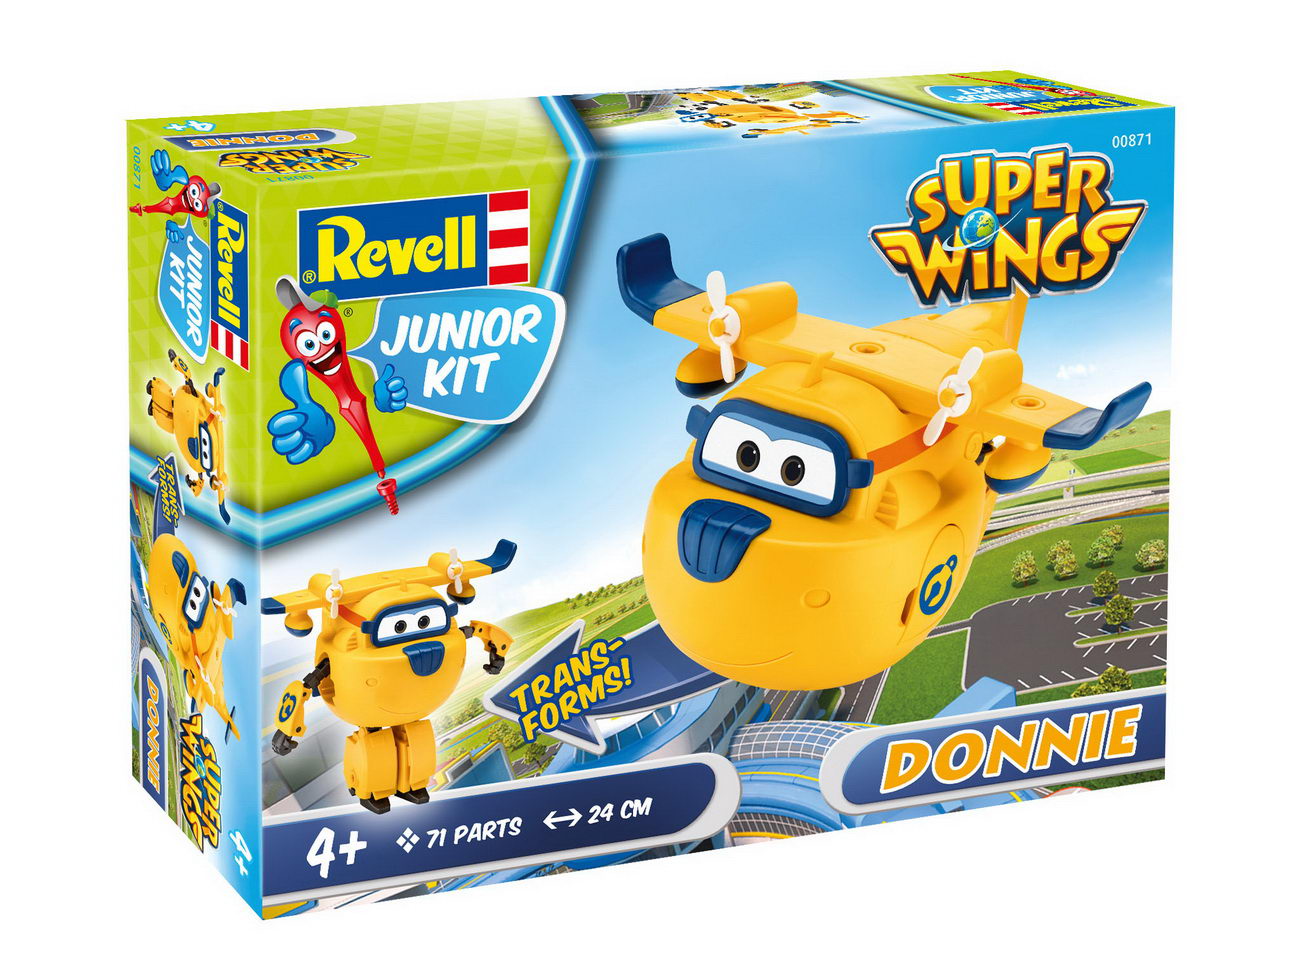 Revell Junior 00871 - Super Wings Donnie Modell